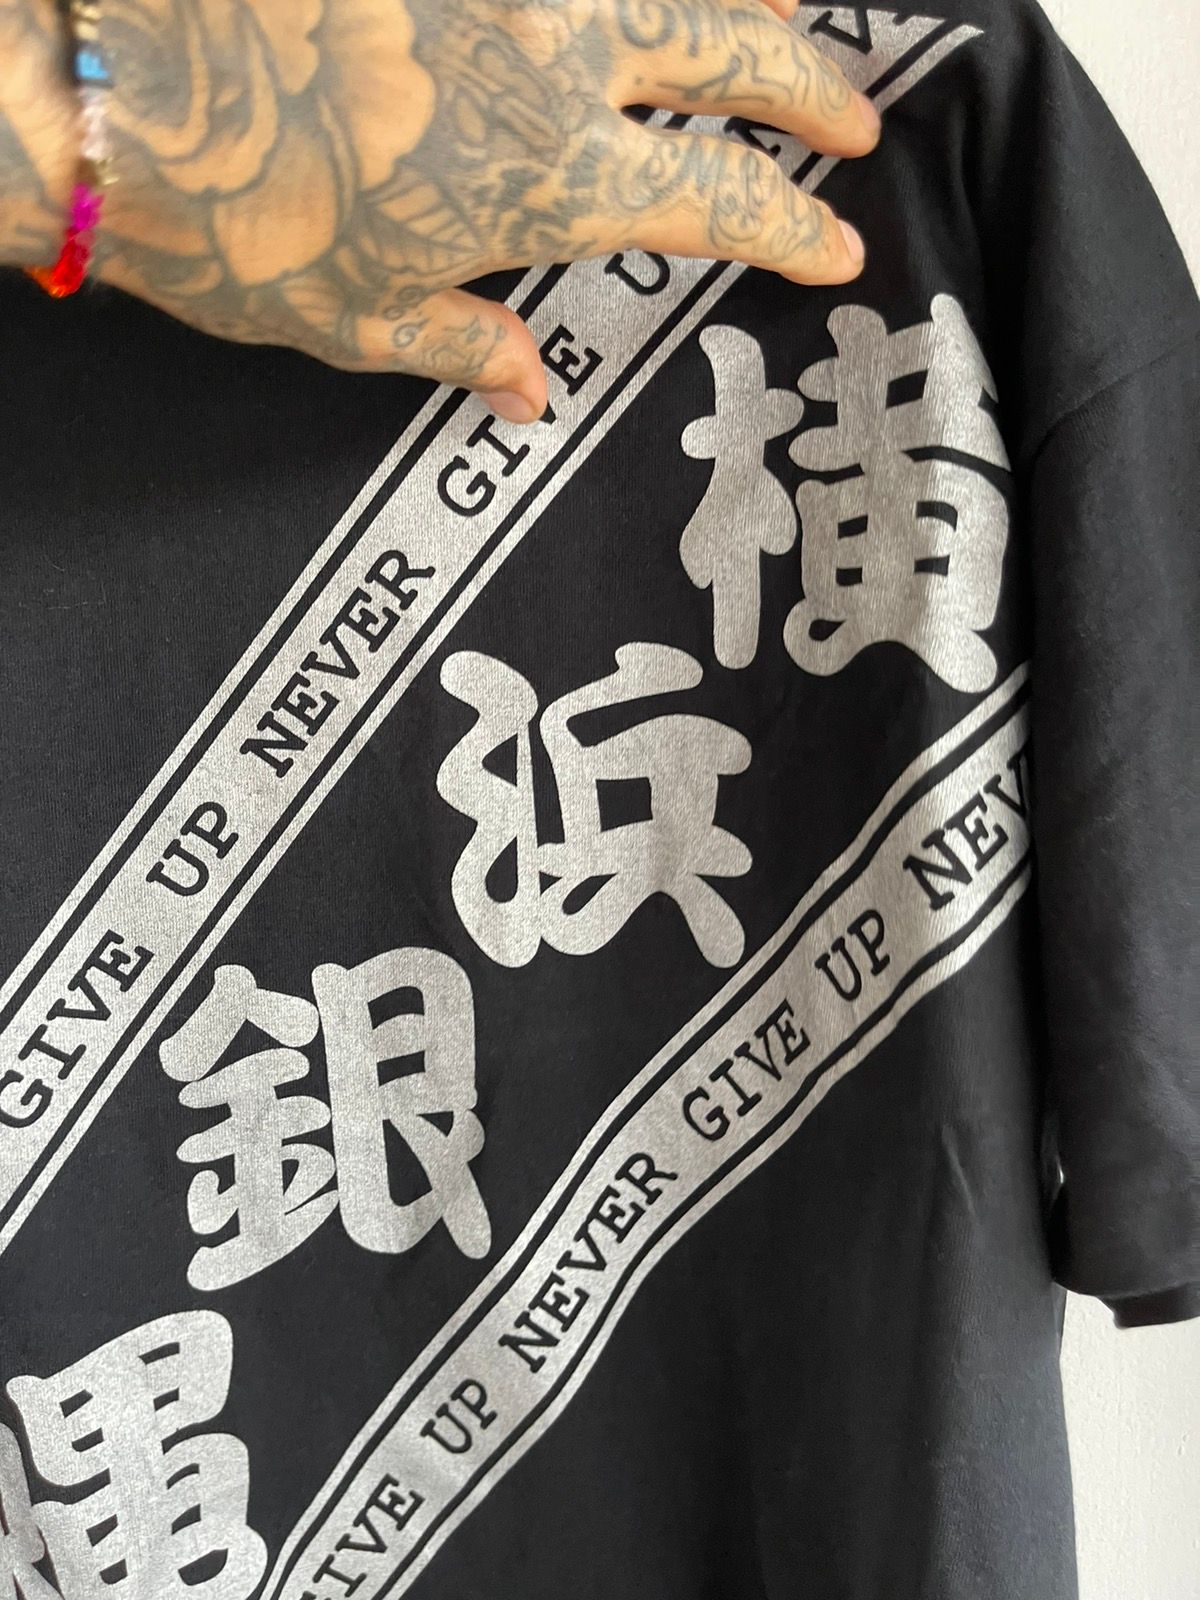 Vintage 2000s Chinnese NEVER GIVE UP Shirt